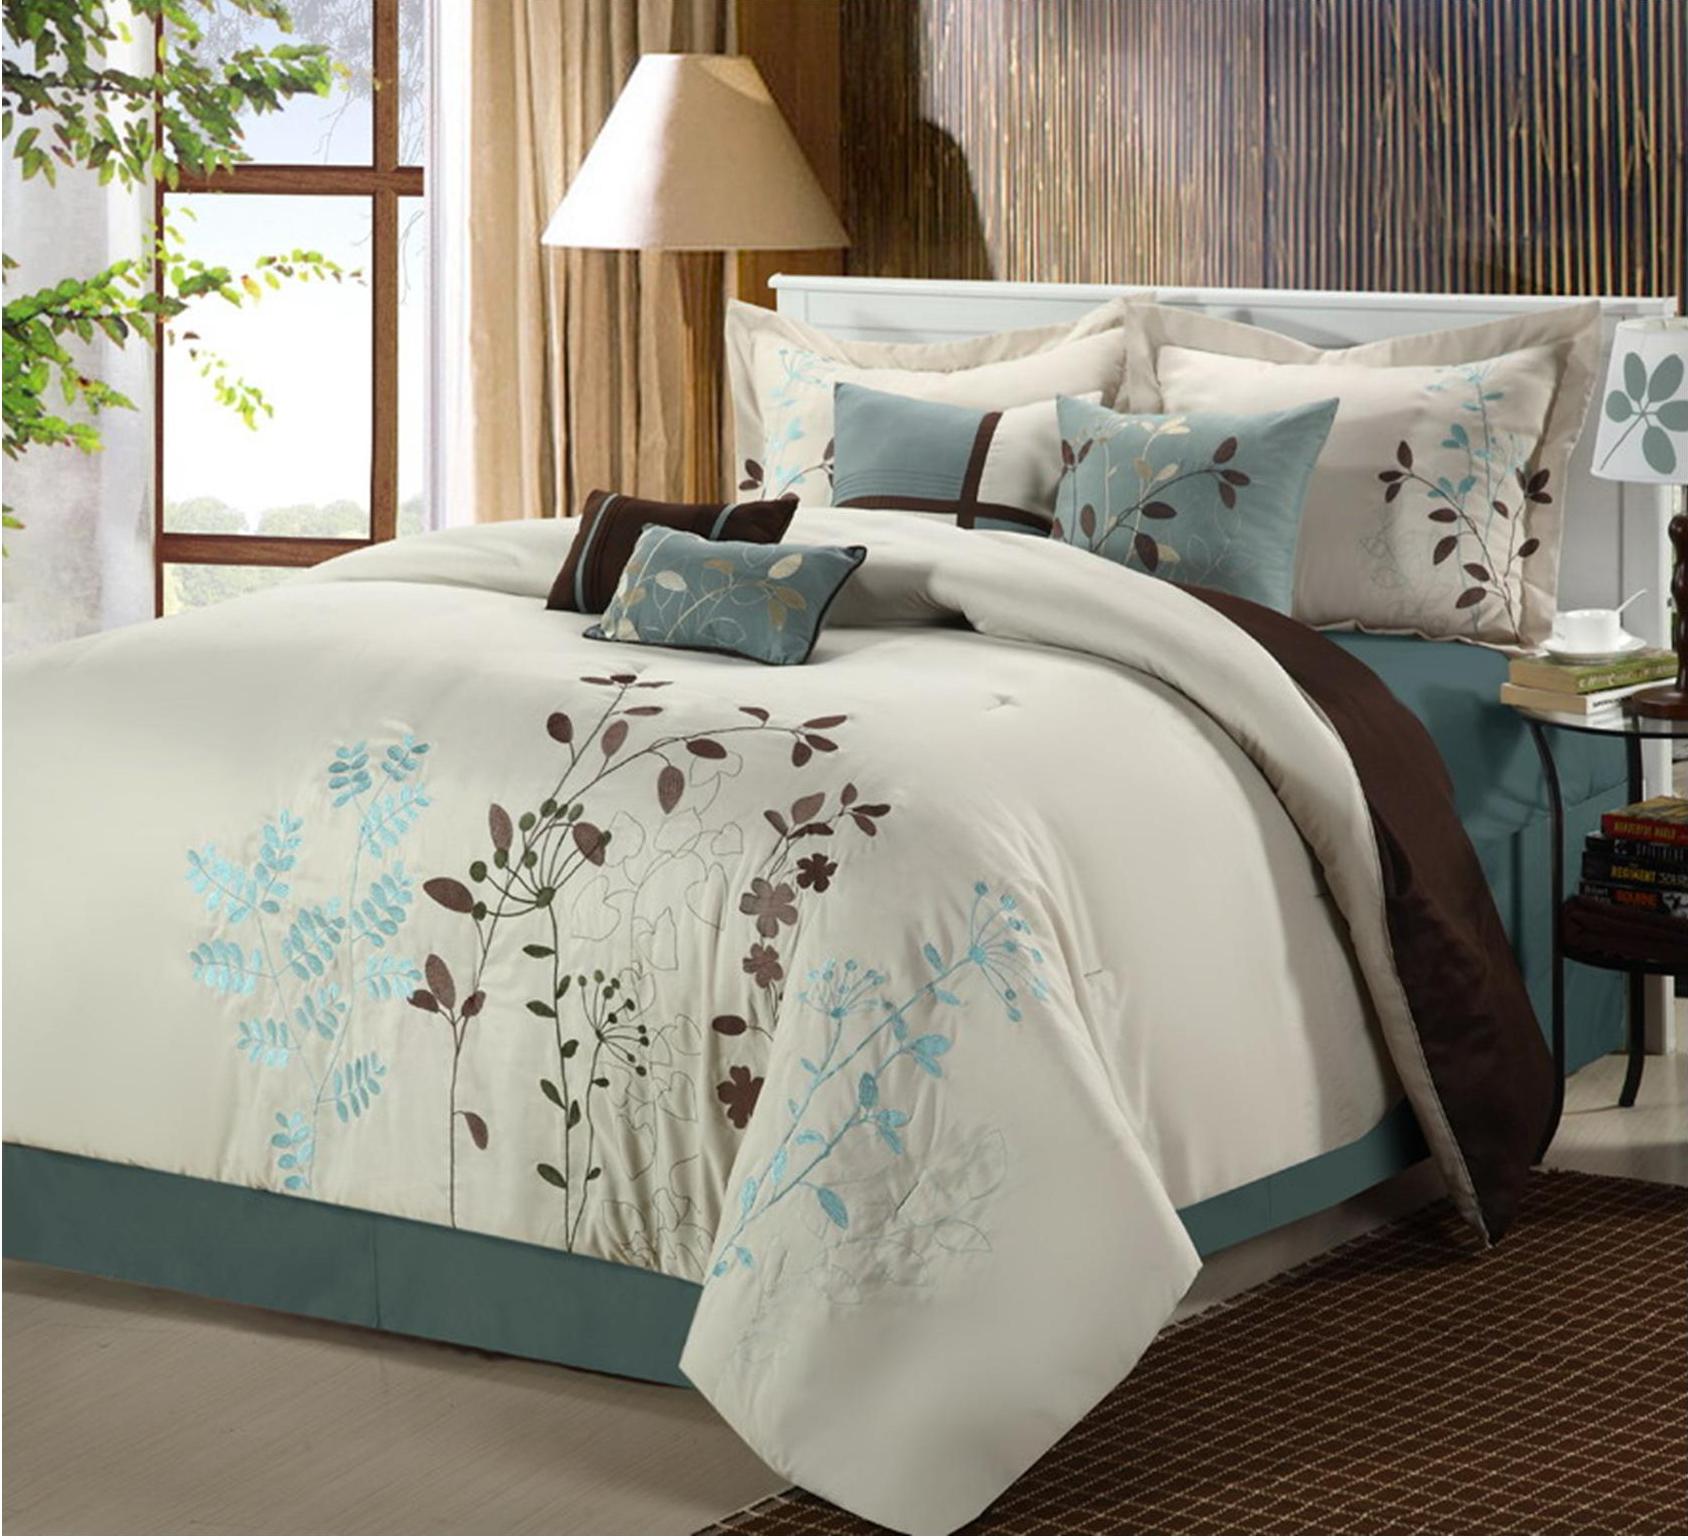 Chic Home Bliss Garden 8 pc Embroidered Comforter Set - Beige